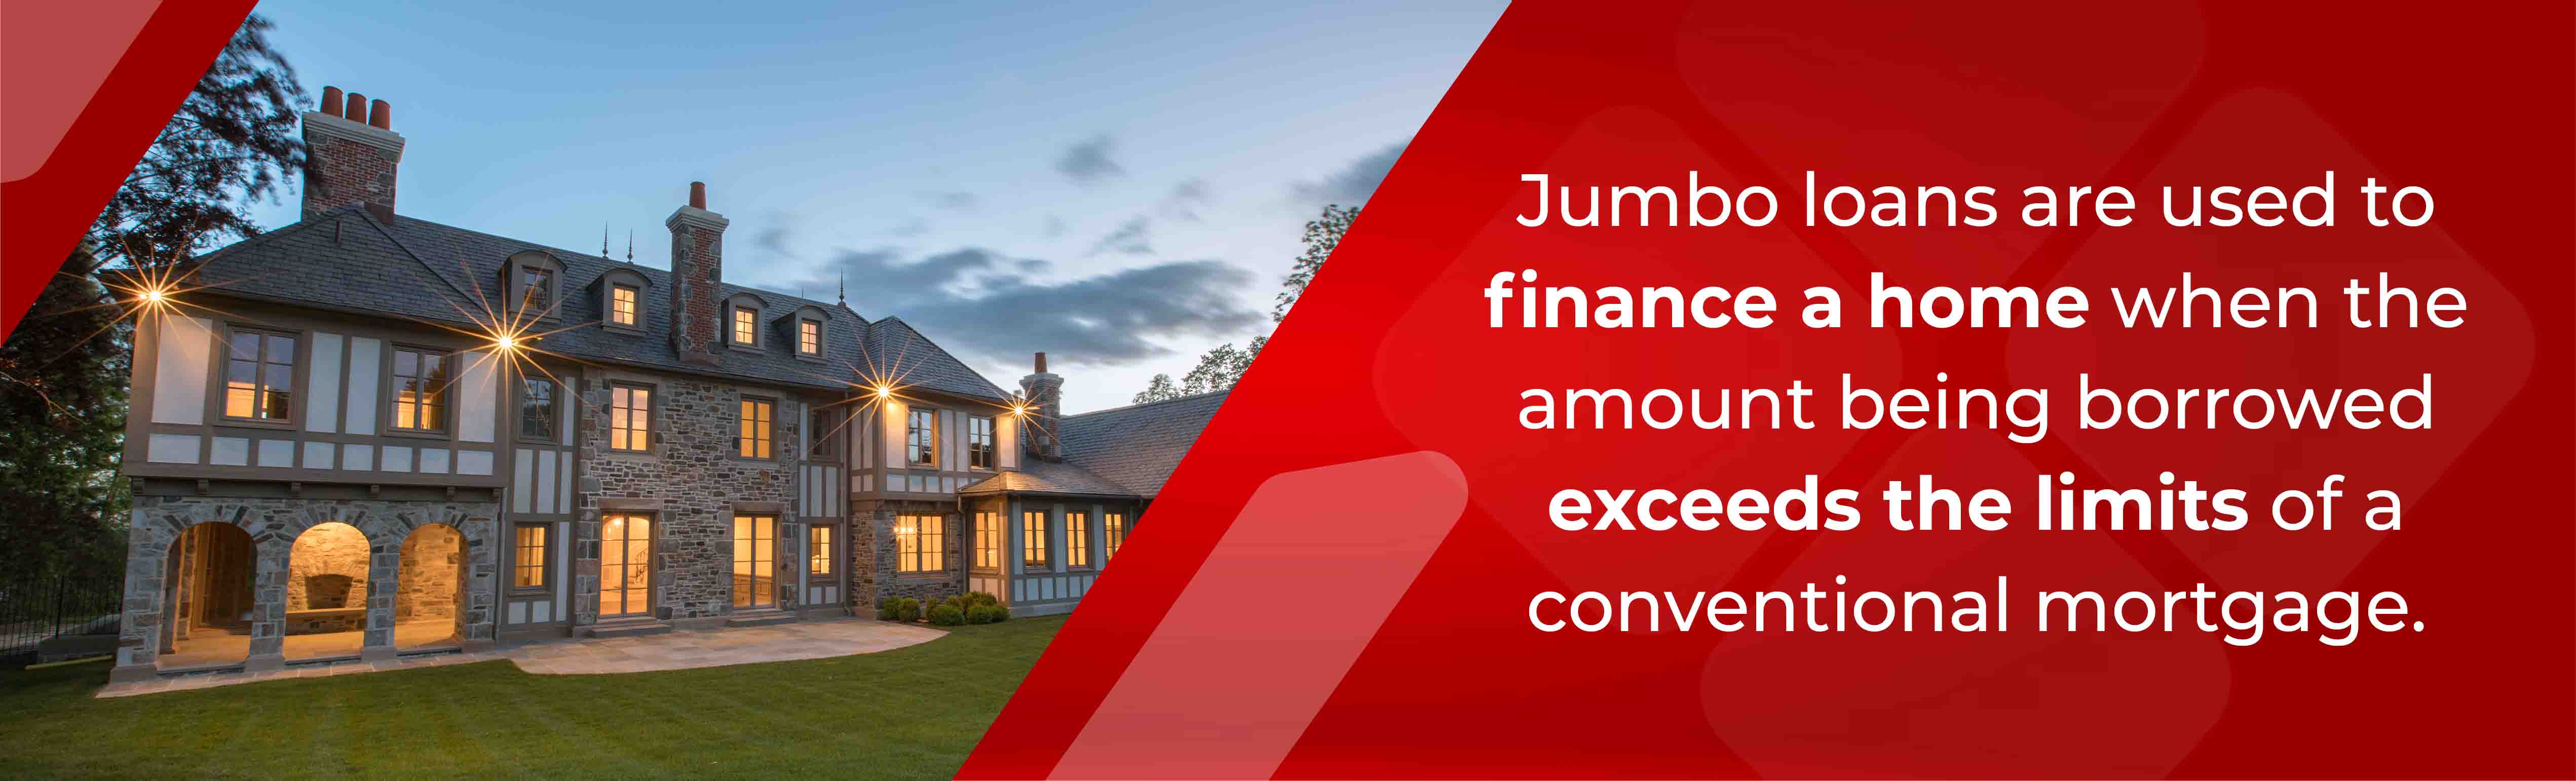 Jumbo loans are used to finance a home when the amount being borrowed exceeds the limits of a conventional mortgage - picture of a mansion